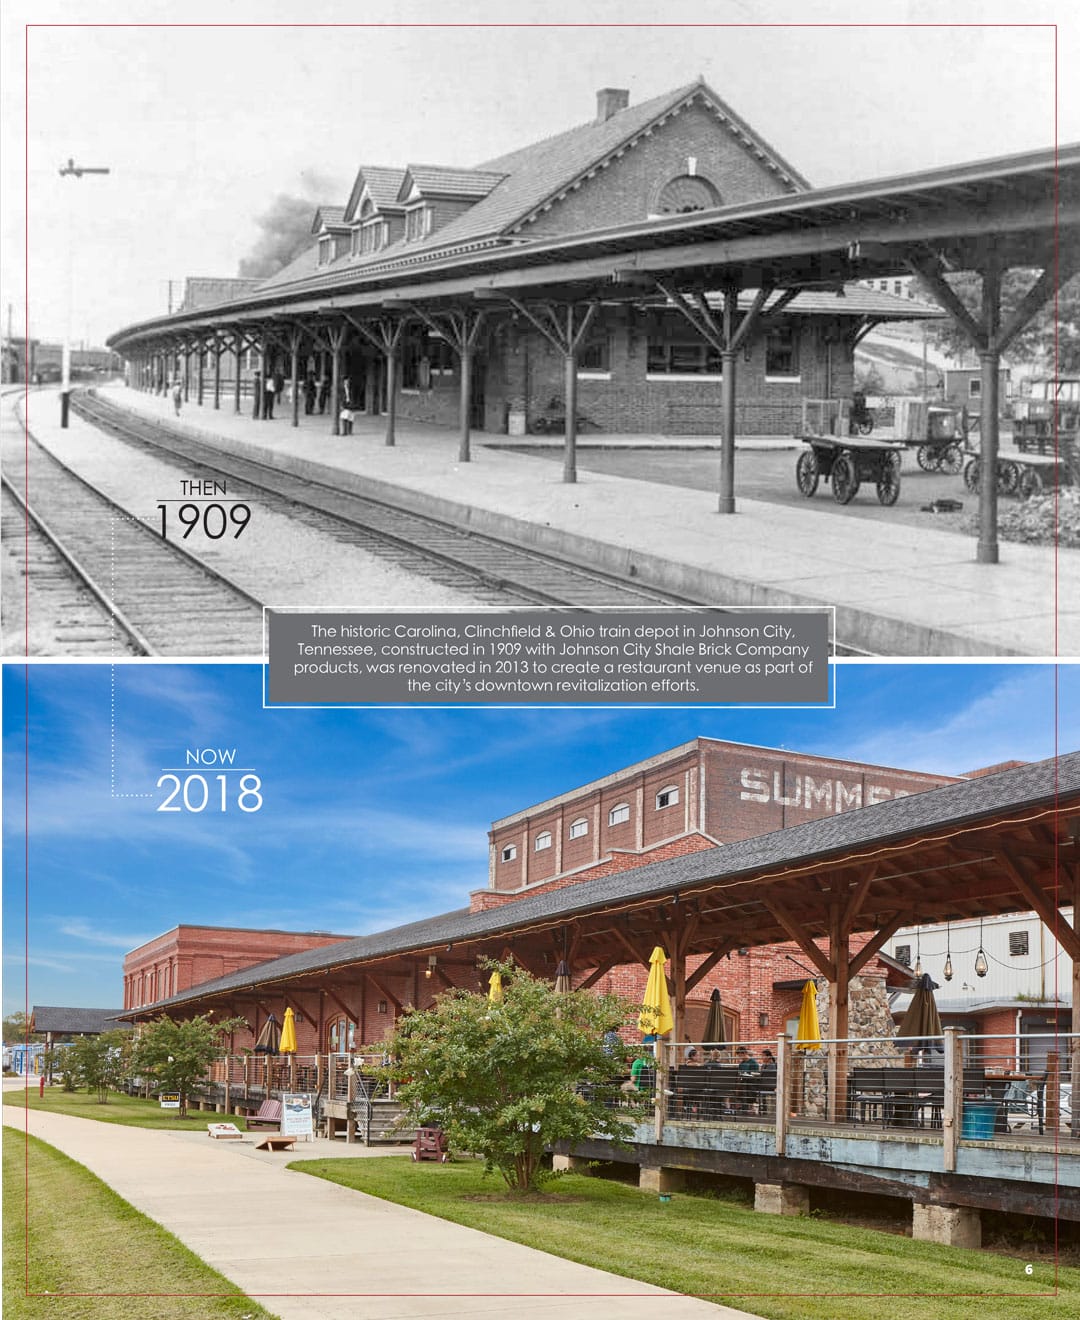 General Shale Booklet - Then and now page showing the historic train depot in Johnson City, Tennessee